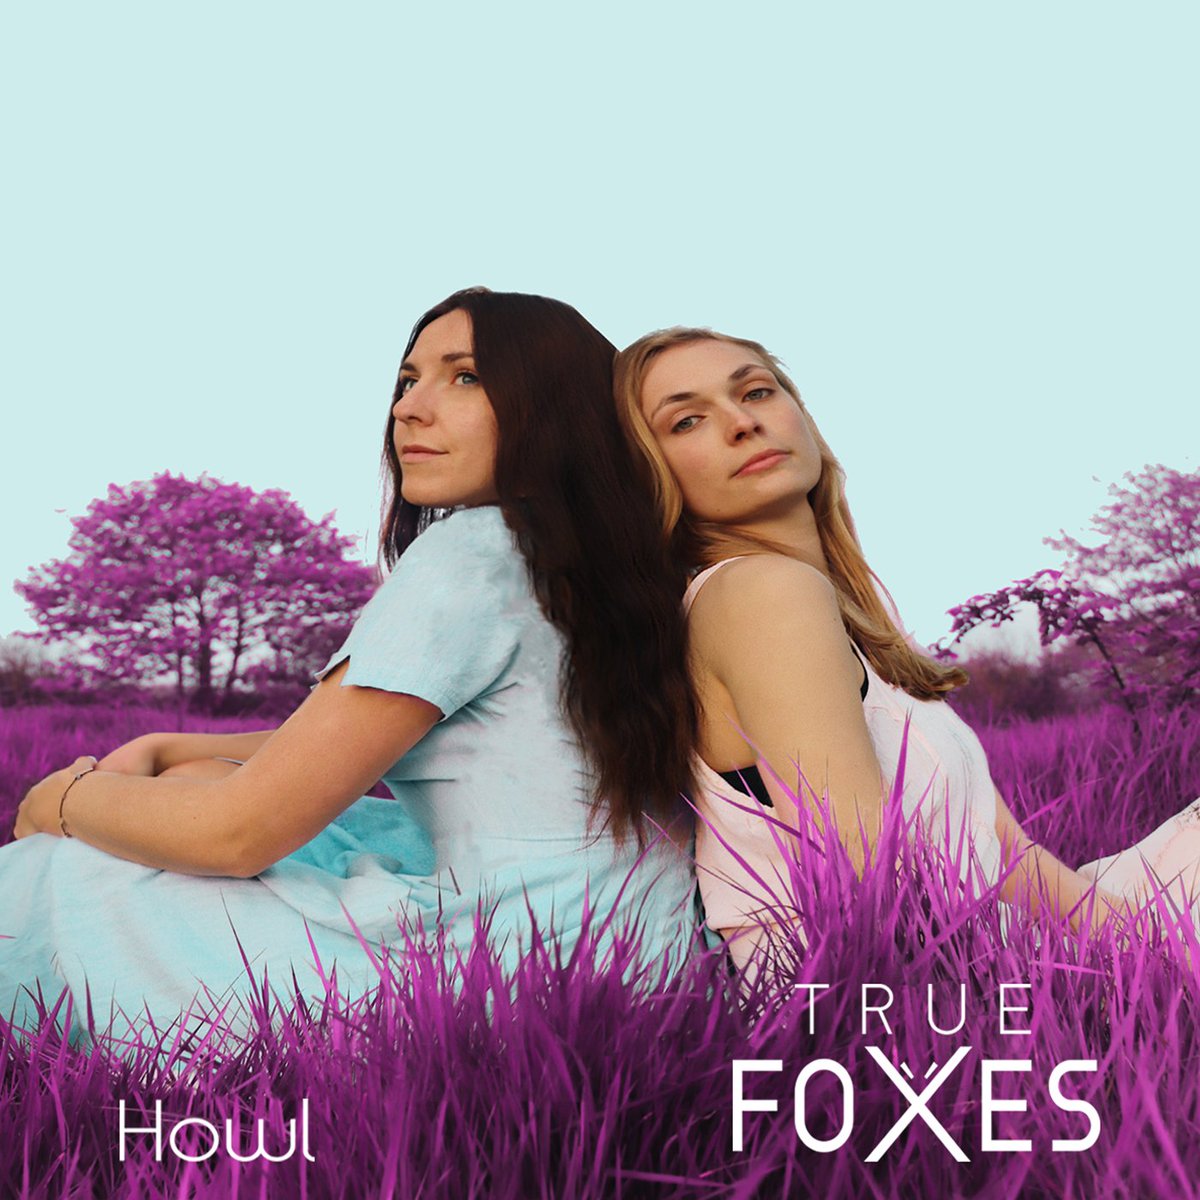 Kind words about the @TrueFoxes album 'Howl', OUT THIS FRIDAY!

'This impressive debut album finds True Foxes doing far more than howl, by creating ten songs that already sound like standards.'
alancackett.com/true-foxes-howl